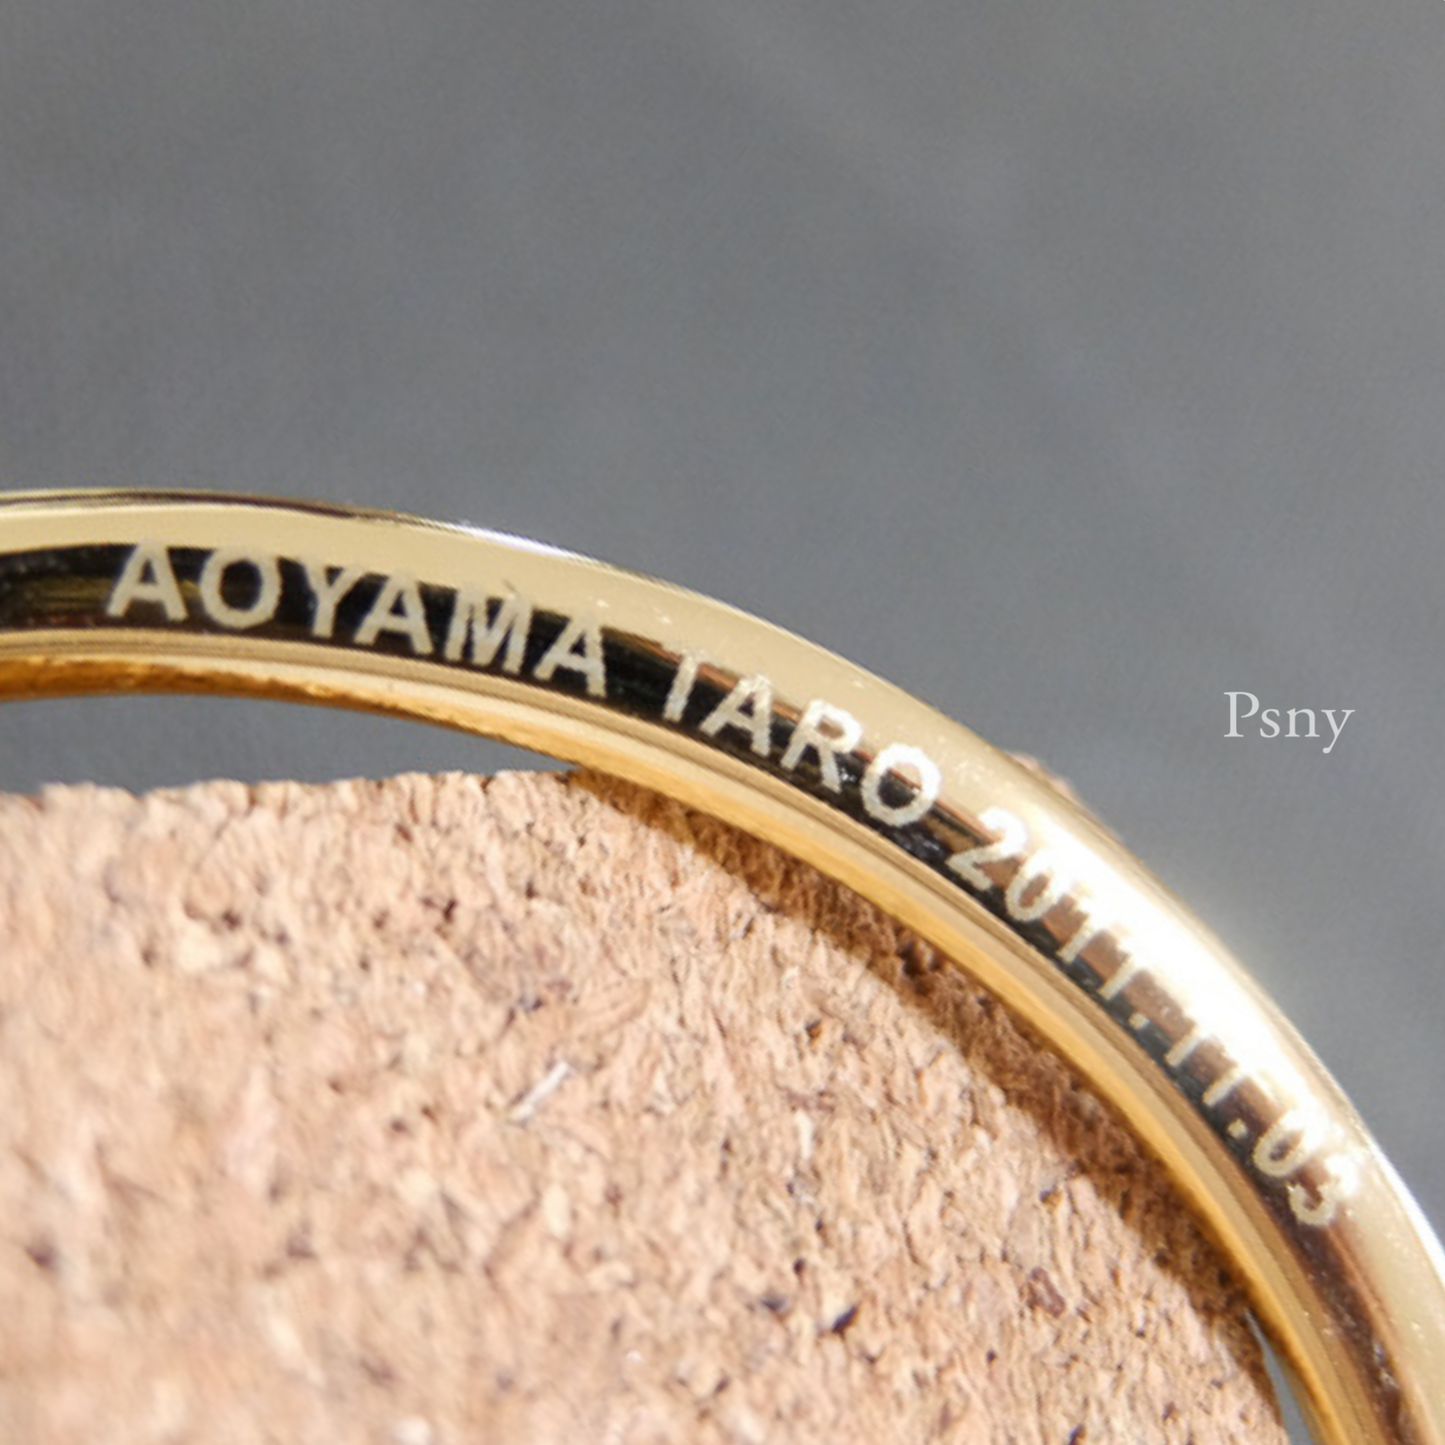 Optional: engraving on the ring